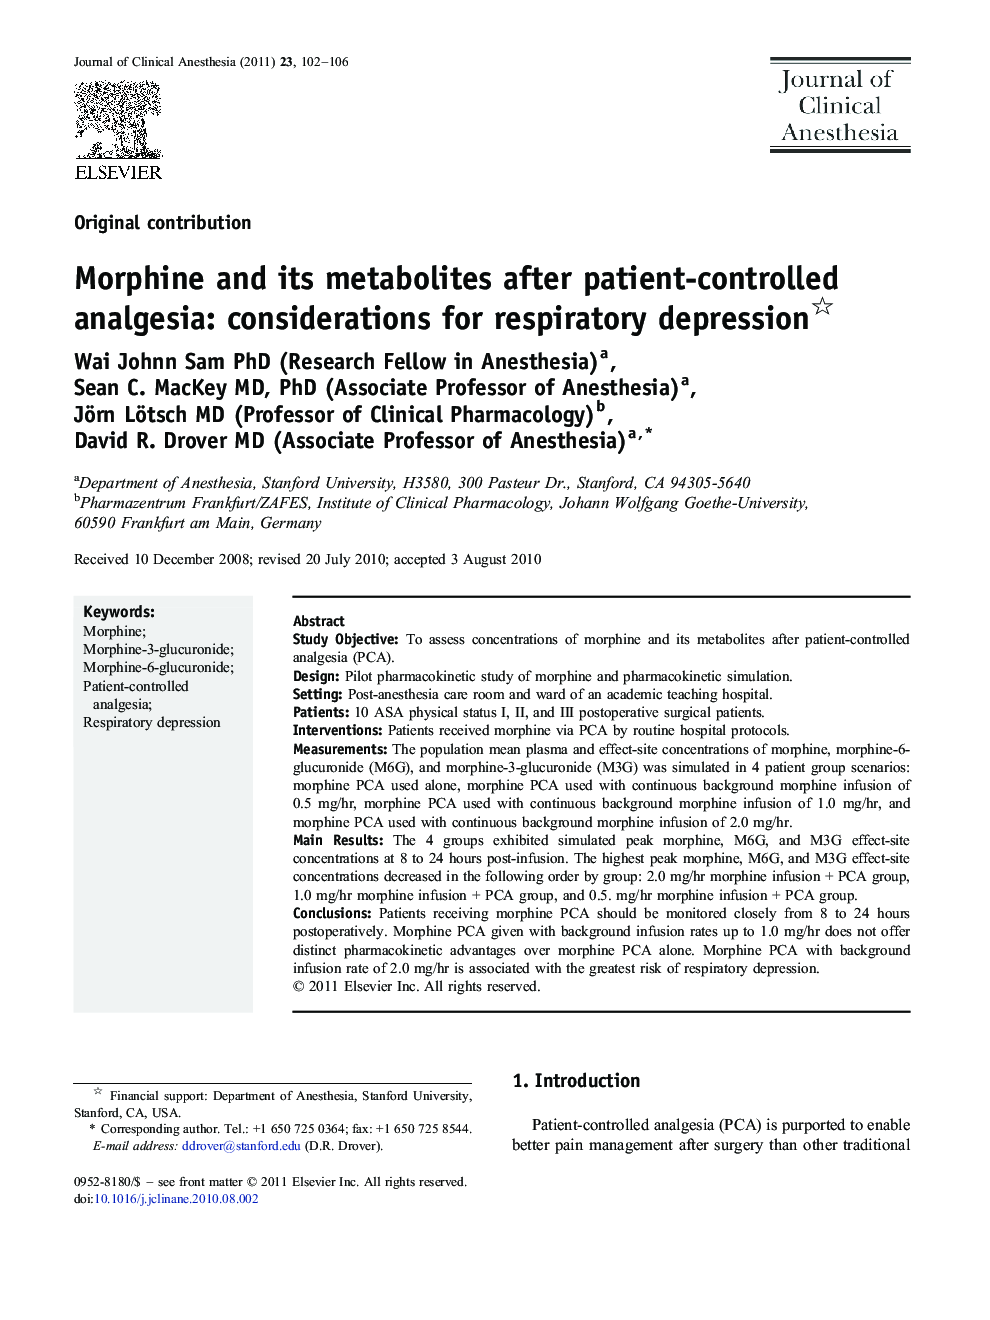 Morphine and its metabolites after patient-controlled analgesia: considerations for respiratory depression 